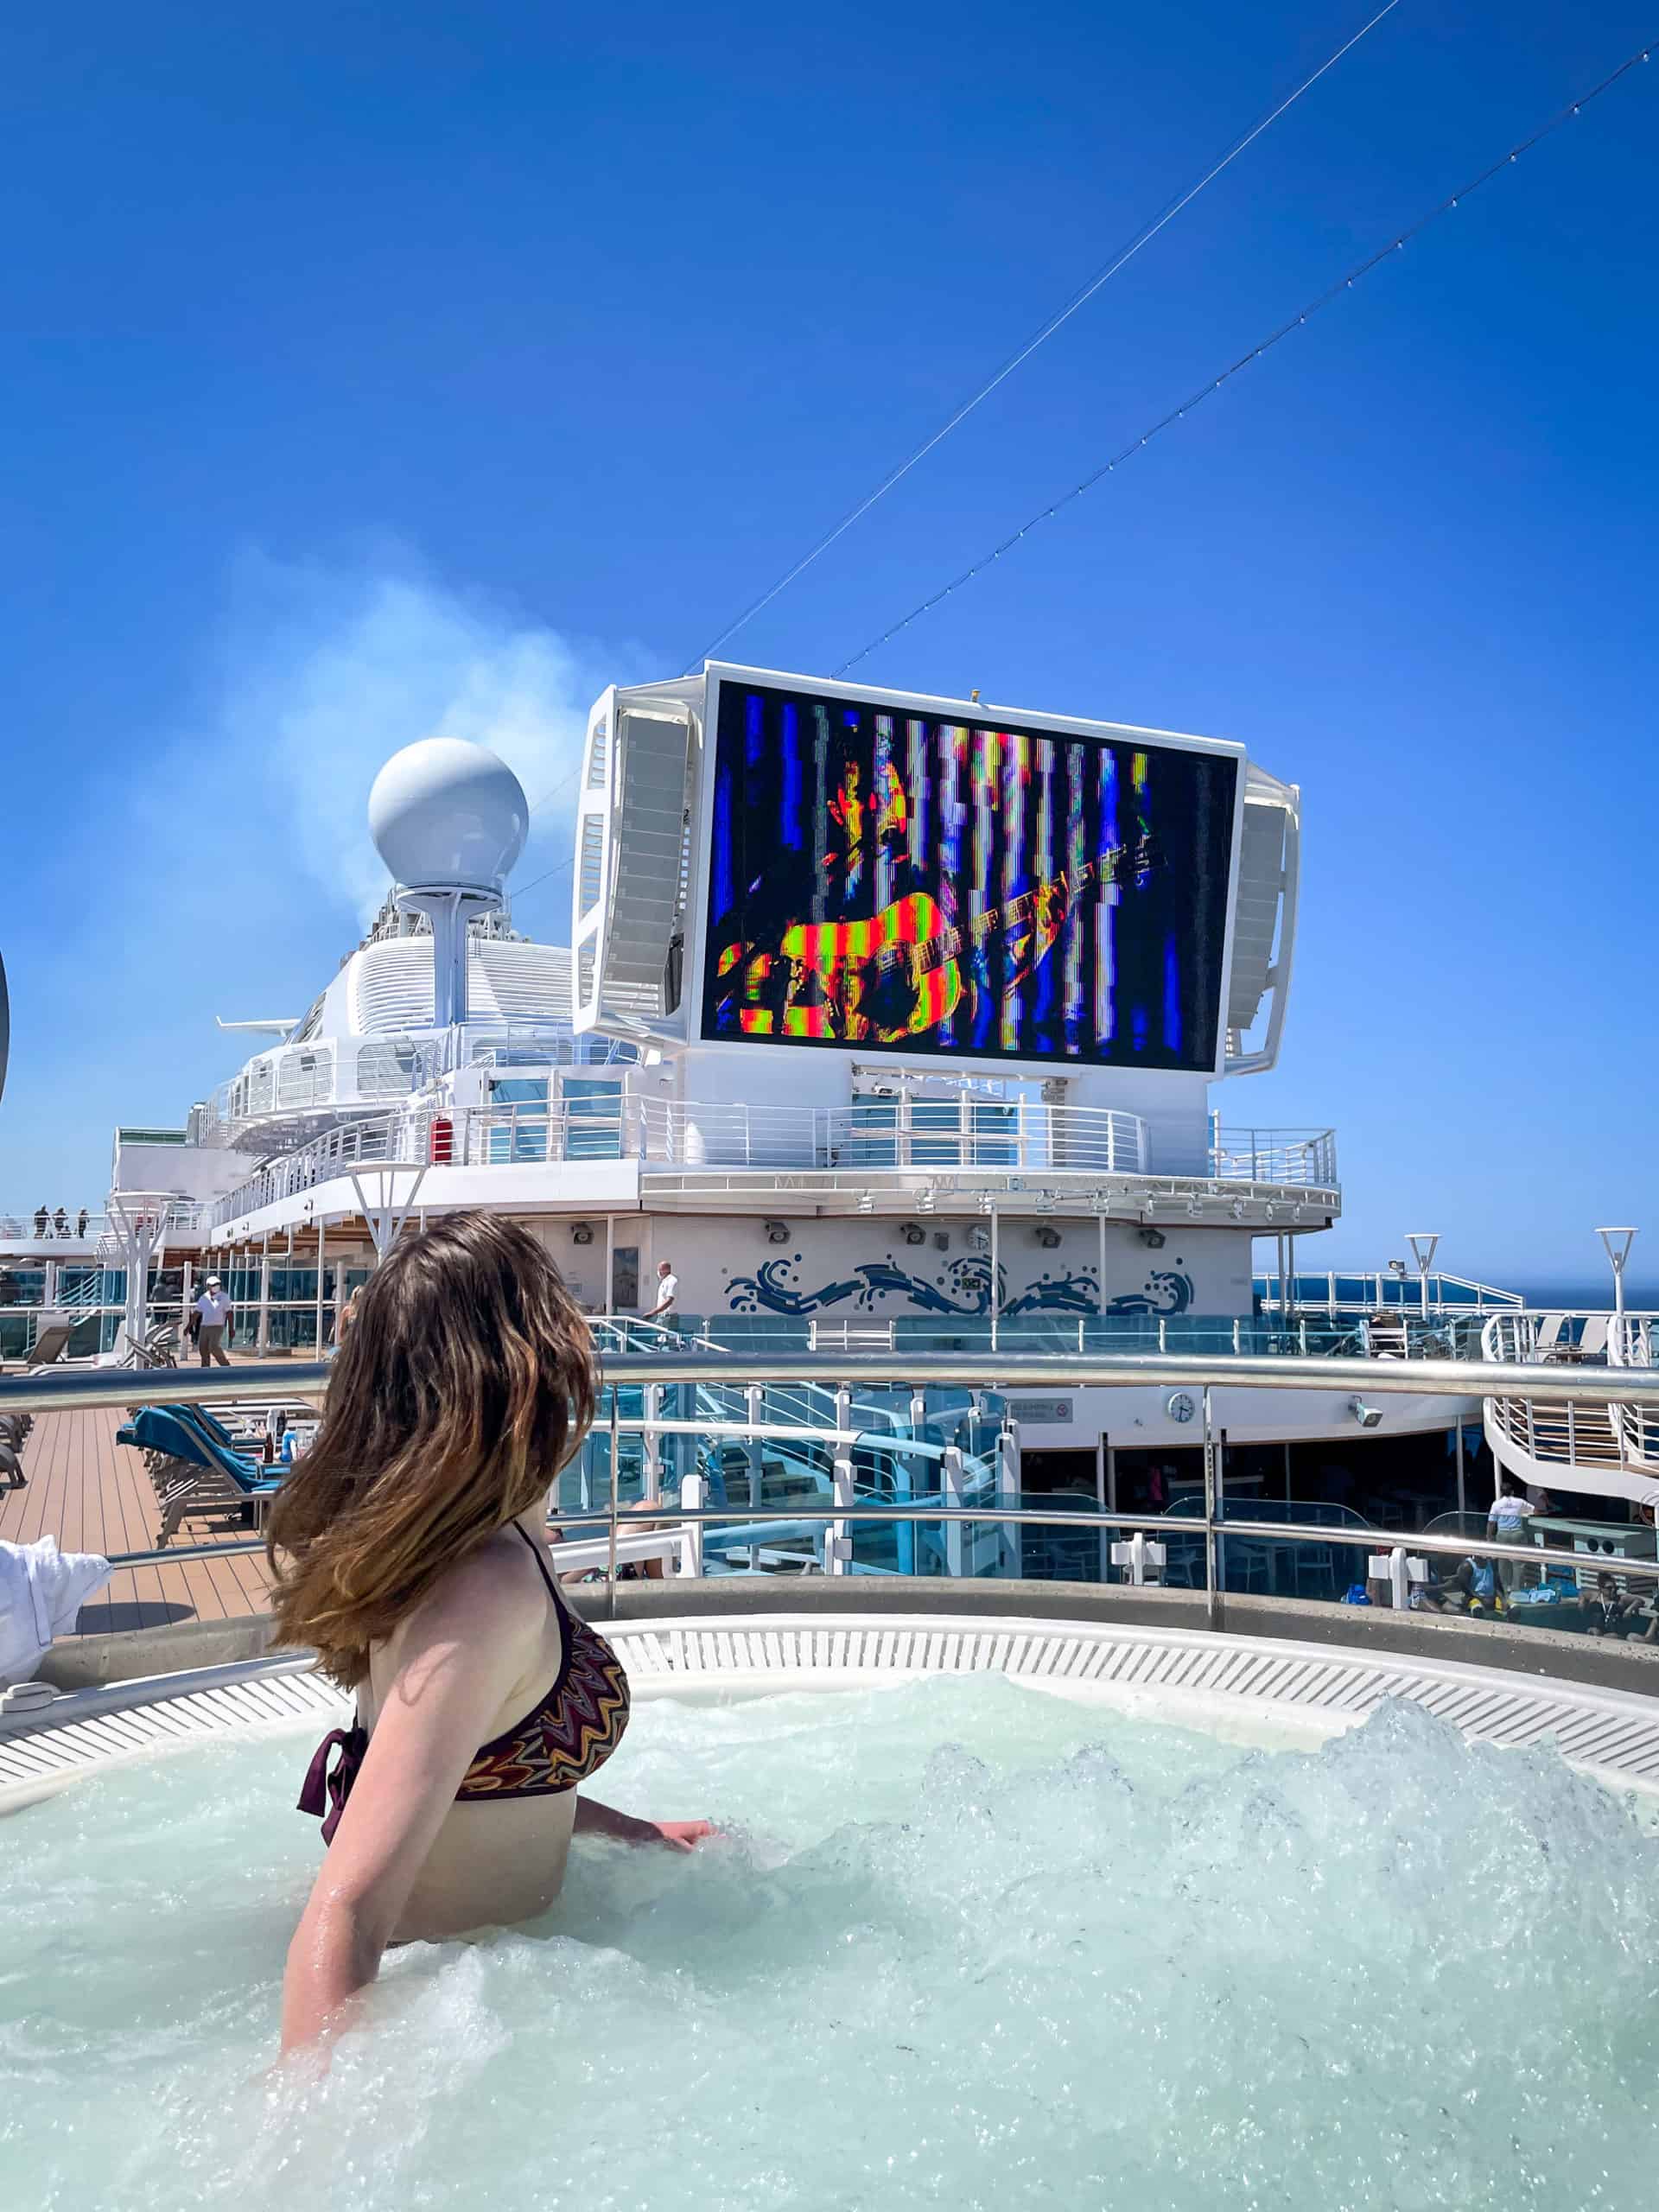 Discovery Princess Cruise Ship - Sabina in the jacuzzi looking at the big screen on the top deck